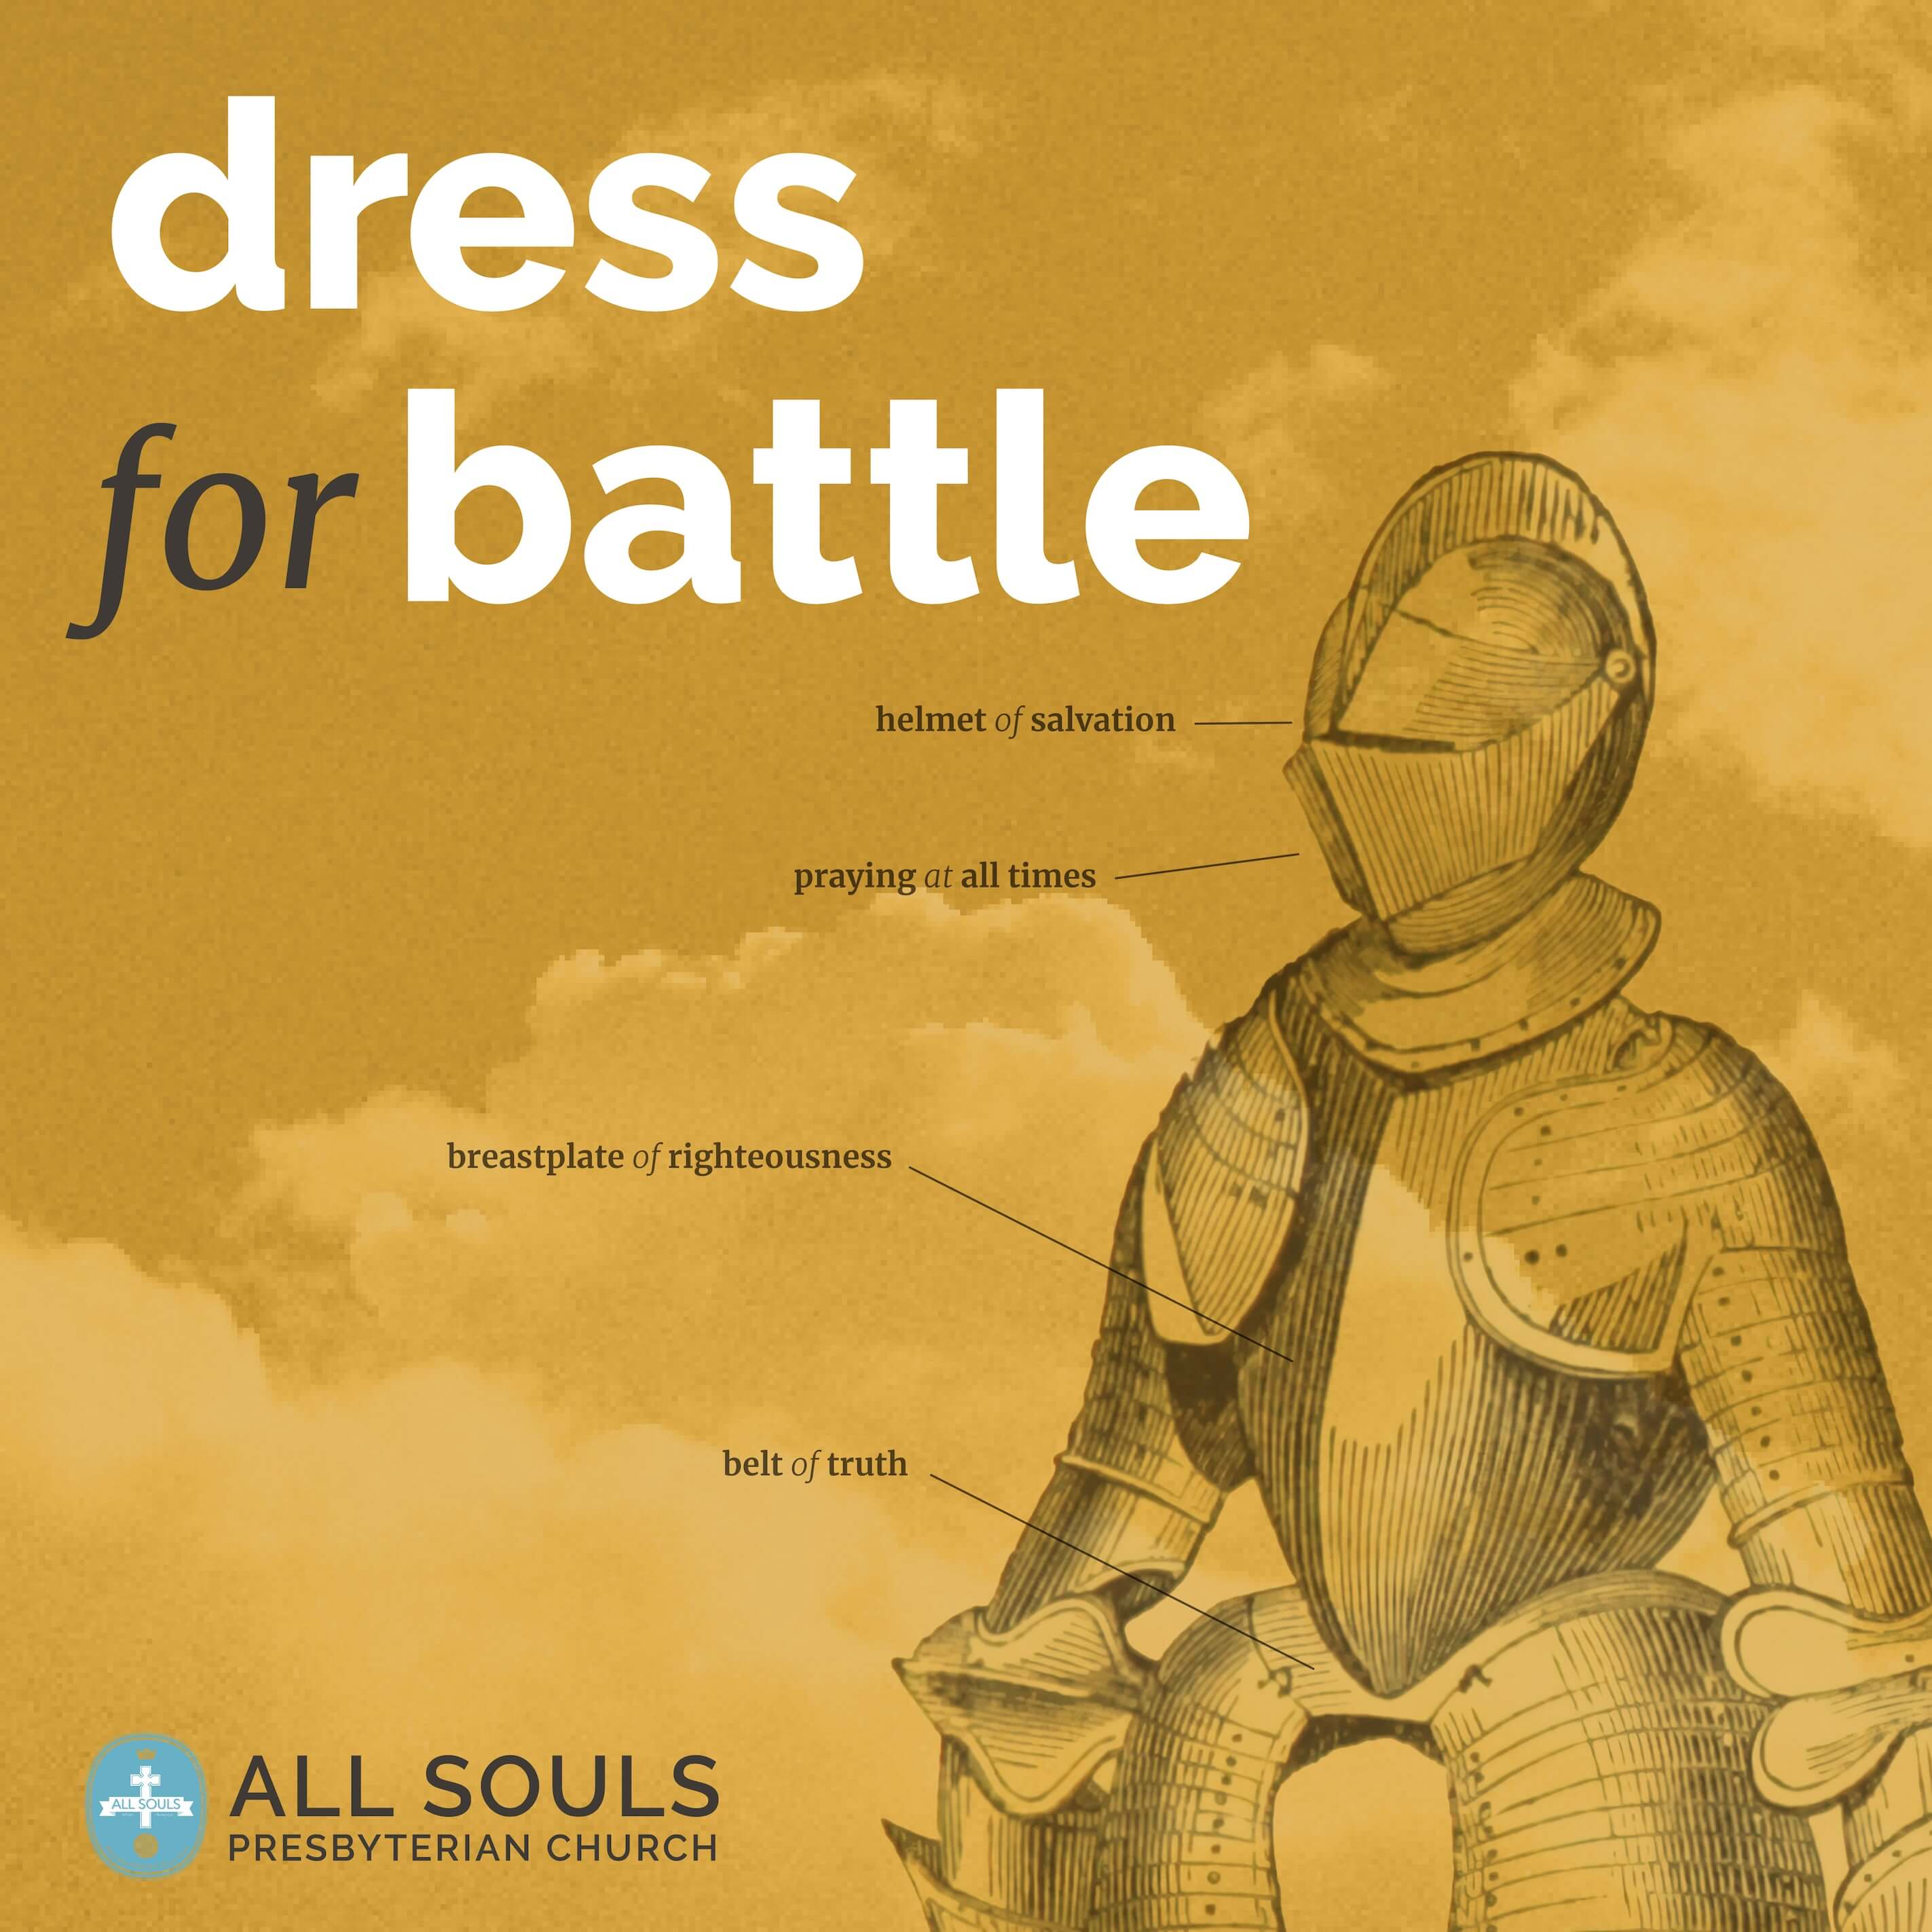 the title Dress for Battle on a yellow background with clouds and a suit of armor